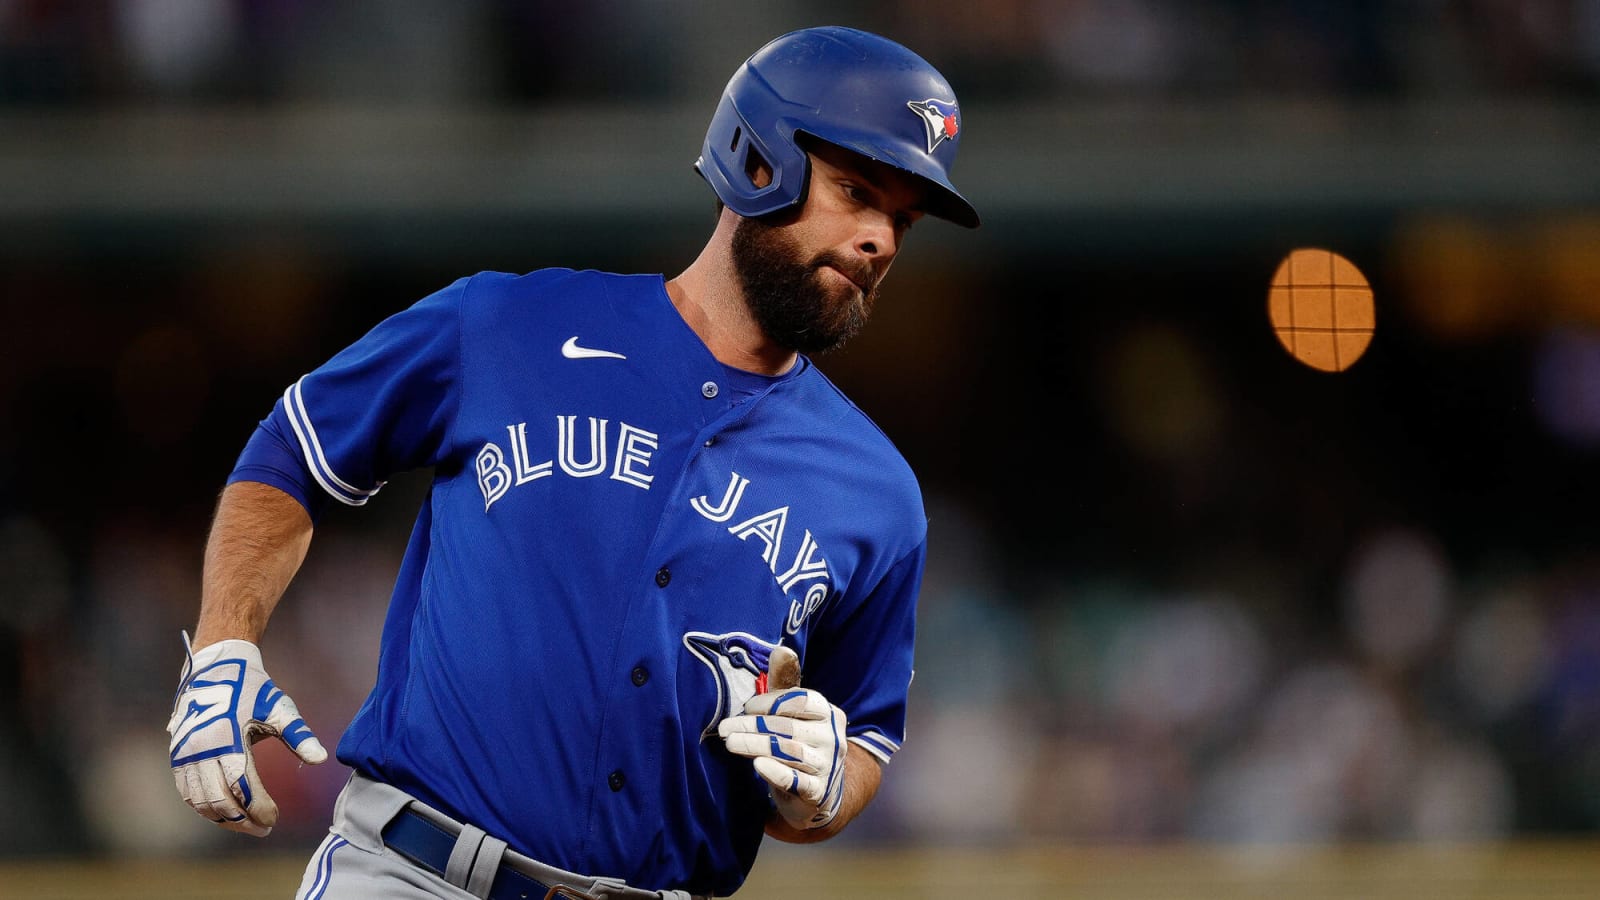 Red Sox Linked To Ex-Blue Jays Slugger In Free Agency After Strong Season